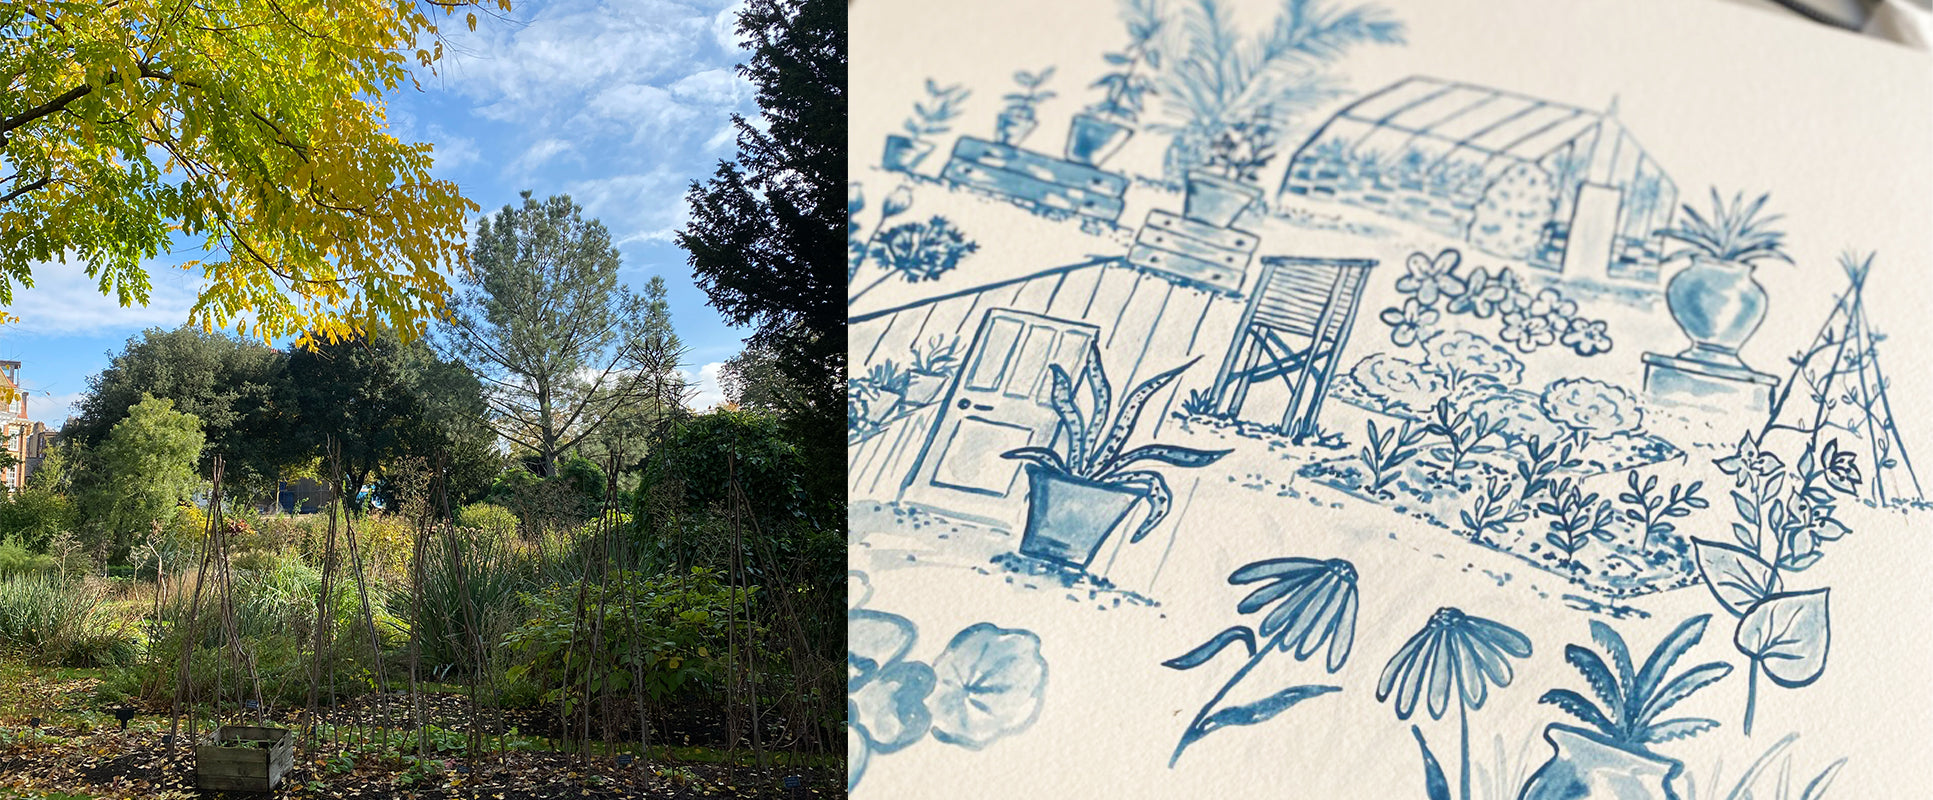 Holly Woodman Sketching At Chelsea Physic Garden